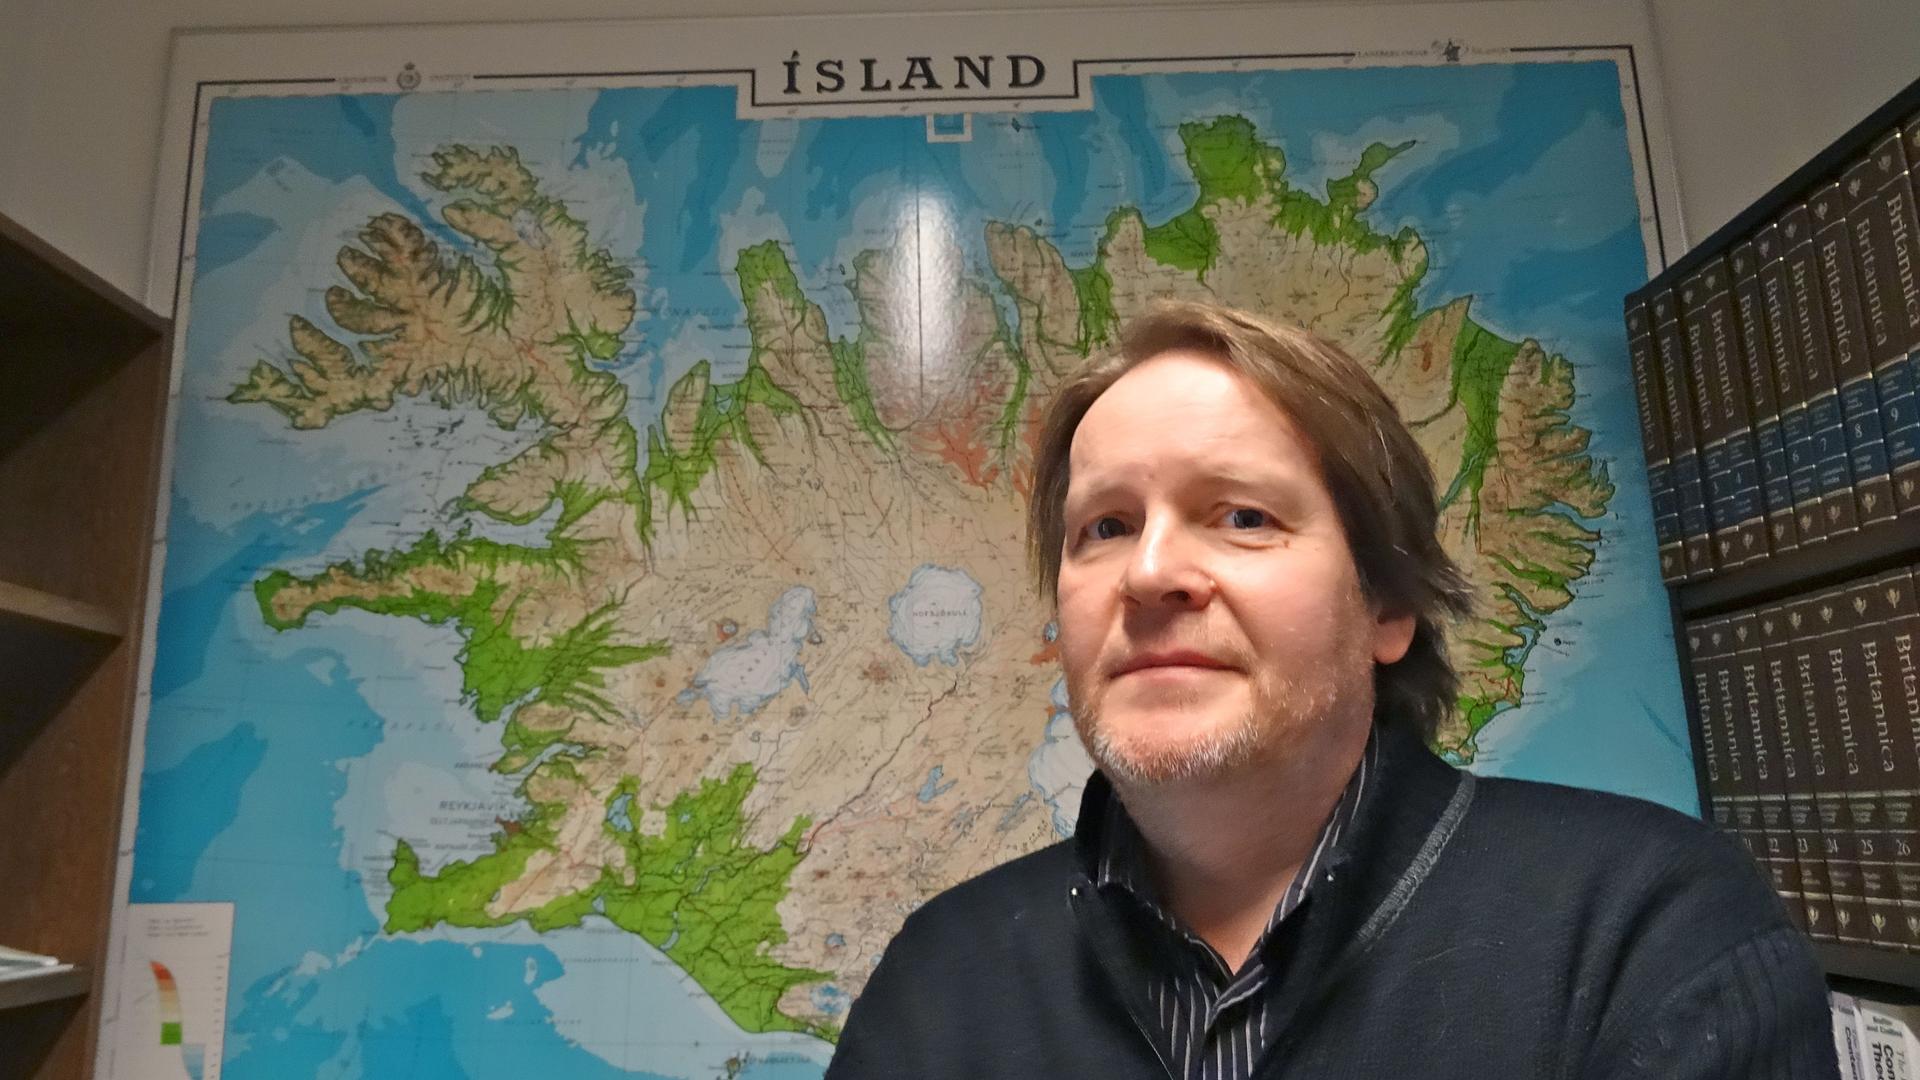 Ari Páll Kristinsson is in charge of language planning at the Árni Magnússon Institute for Icelandic Studies, the Icelandic government's language research agency.